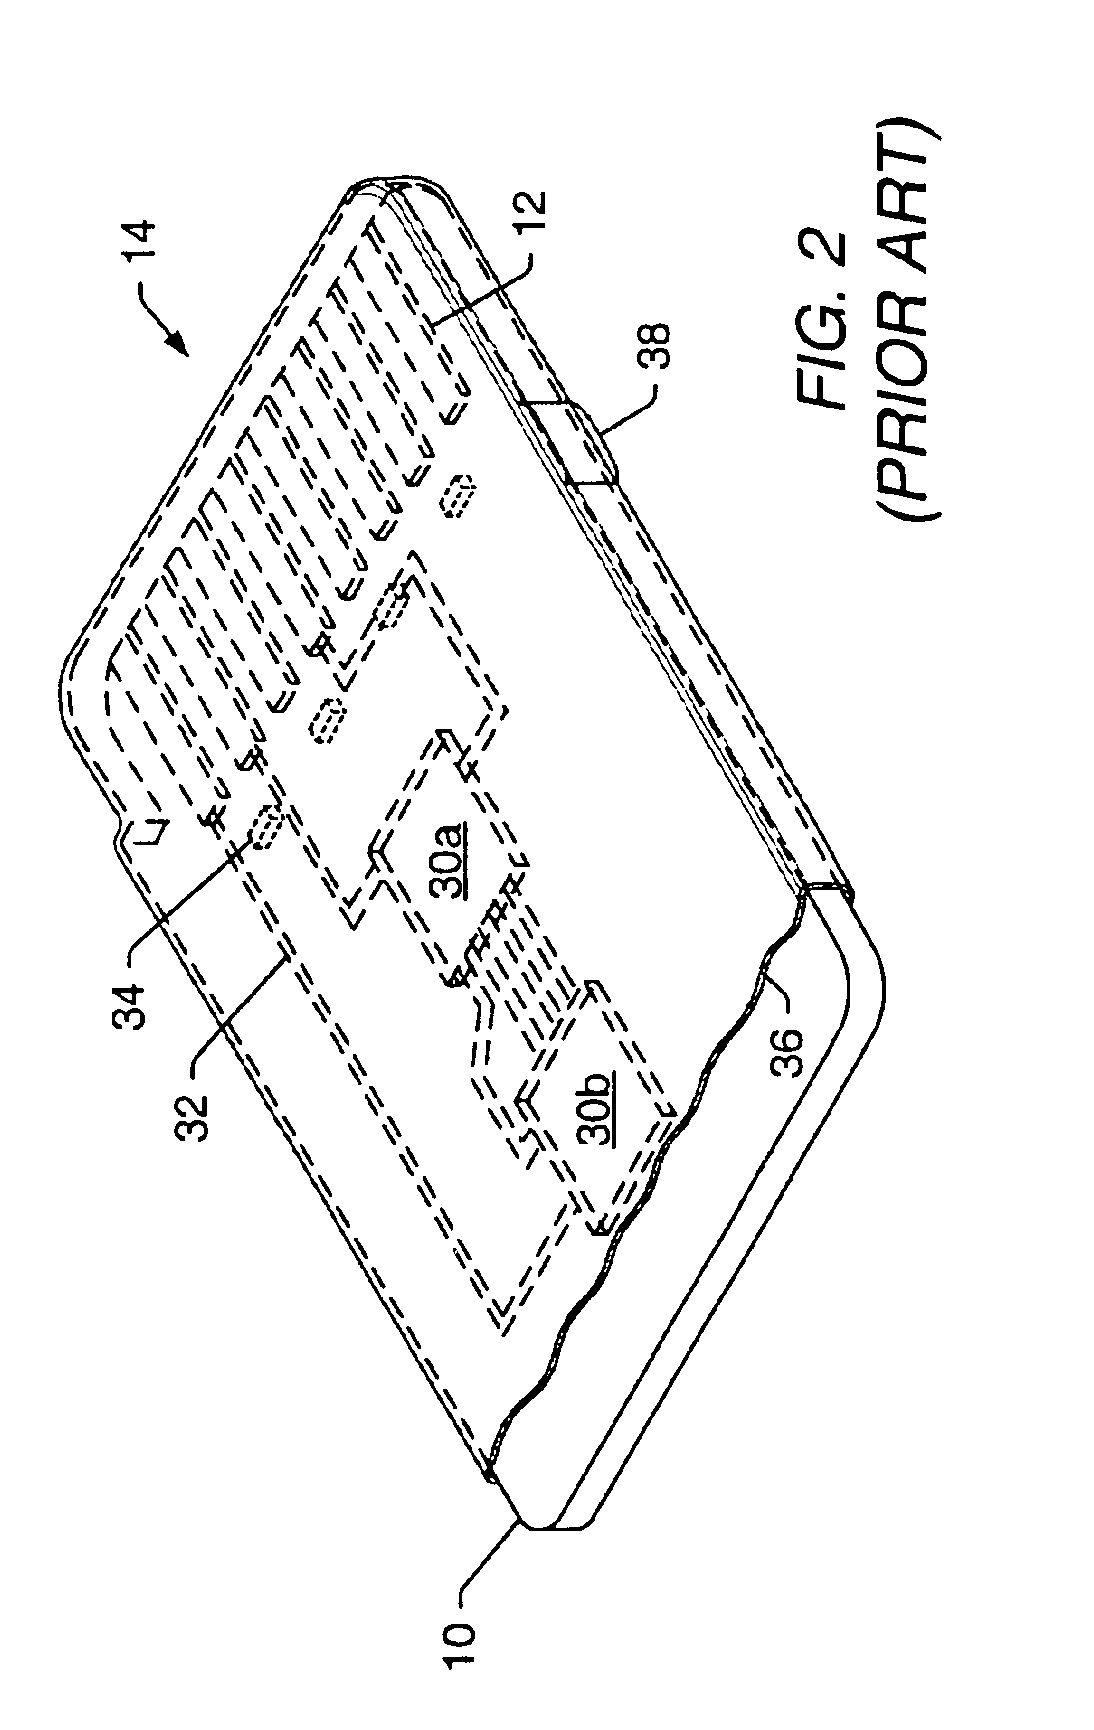 Molded memory module and method of making the module absent a substrate support